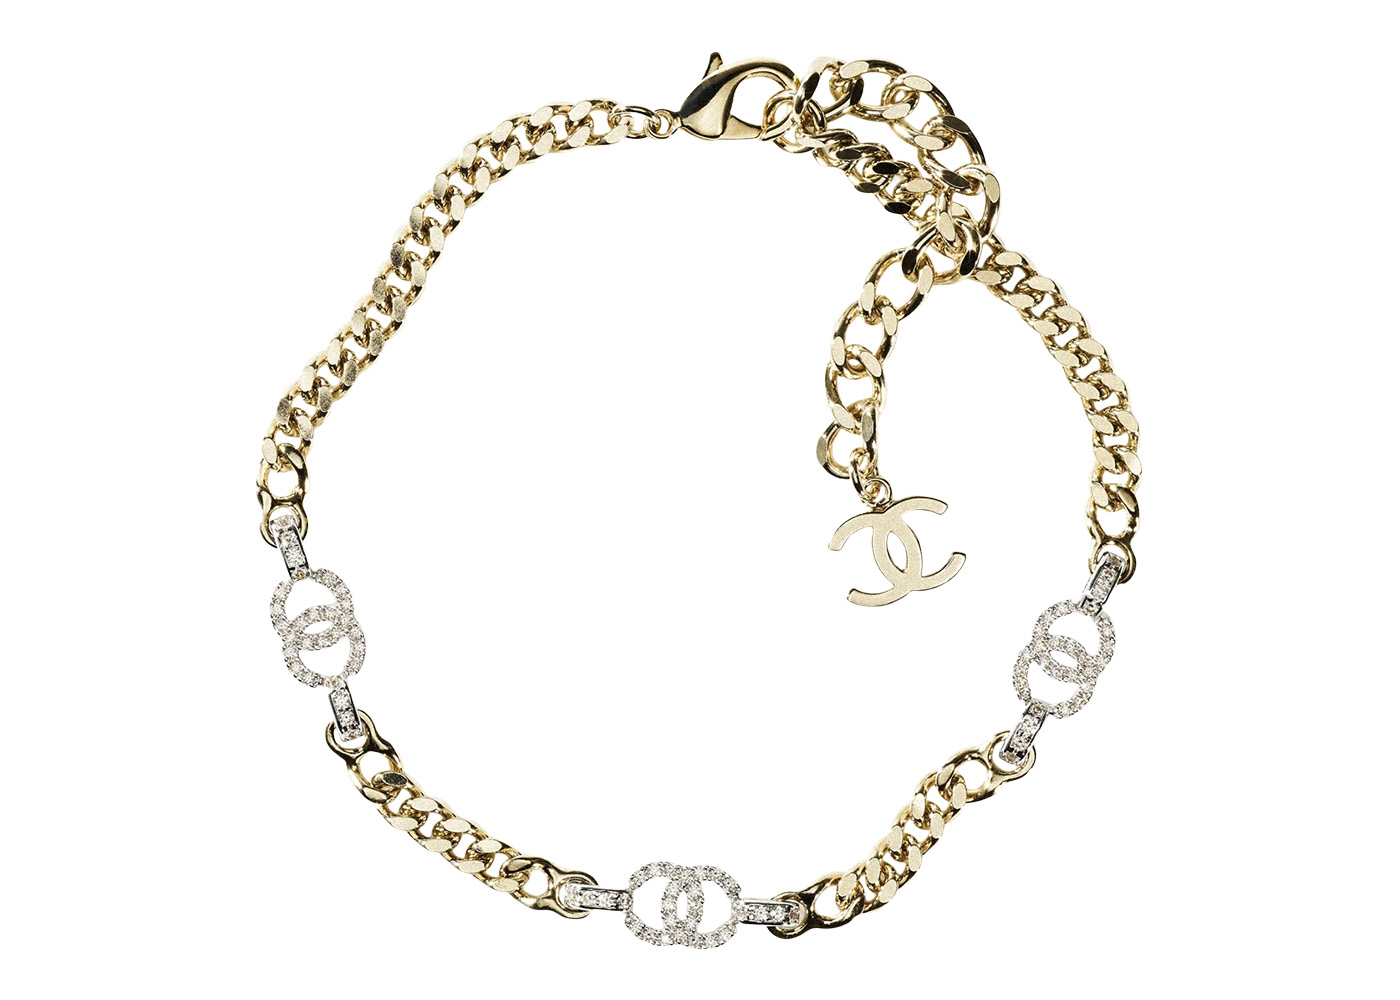 Chanel Choker Necklace AB8287 Gold/Silver/Crystal